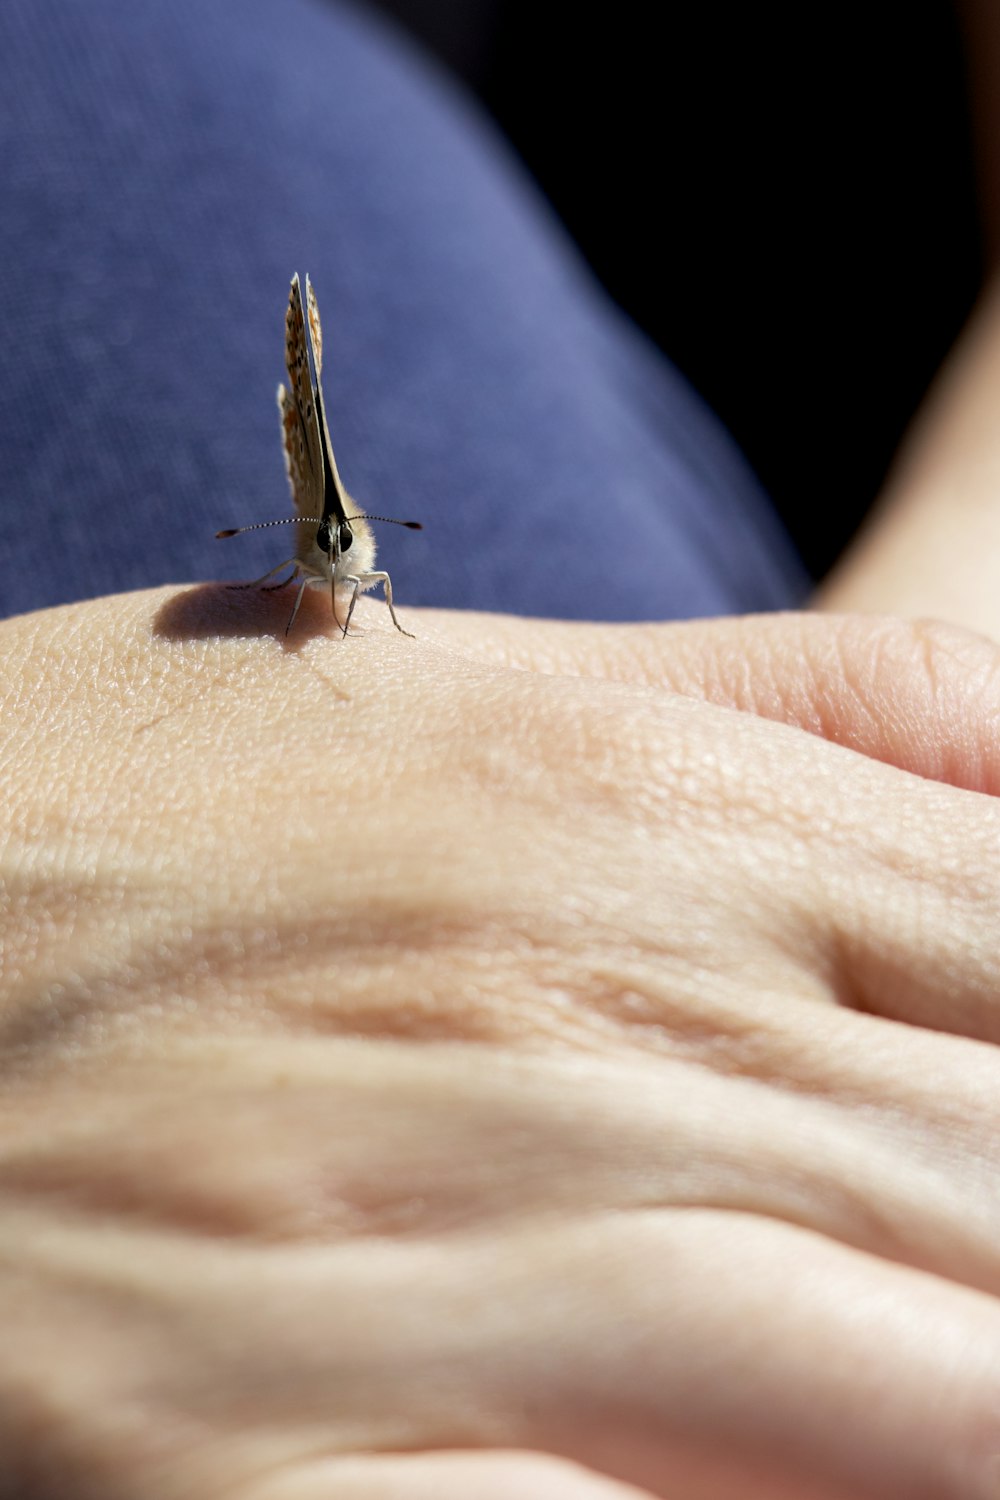 a close up of a person's hand holding a small insect